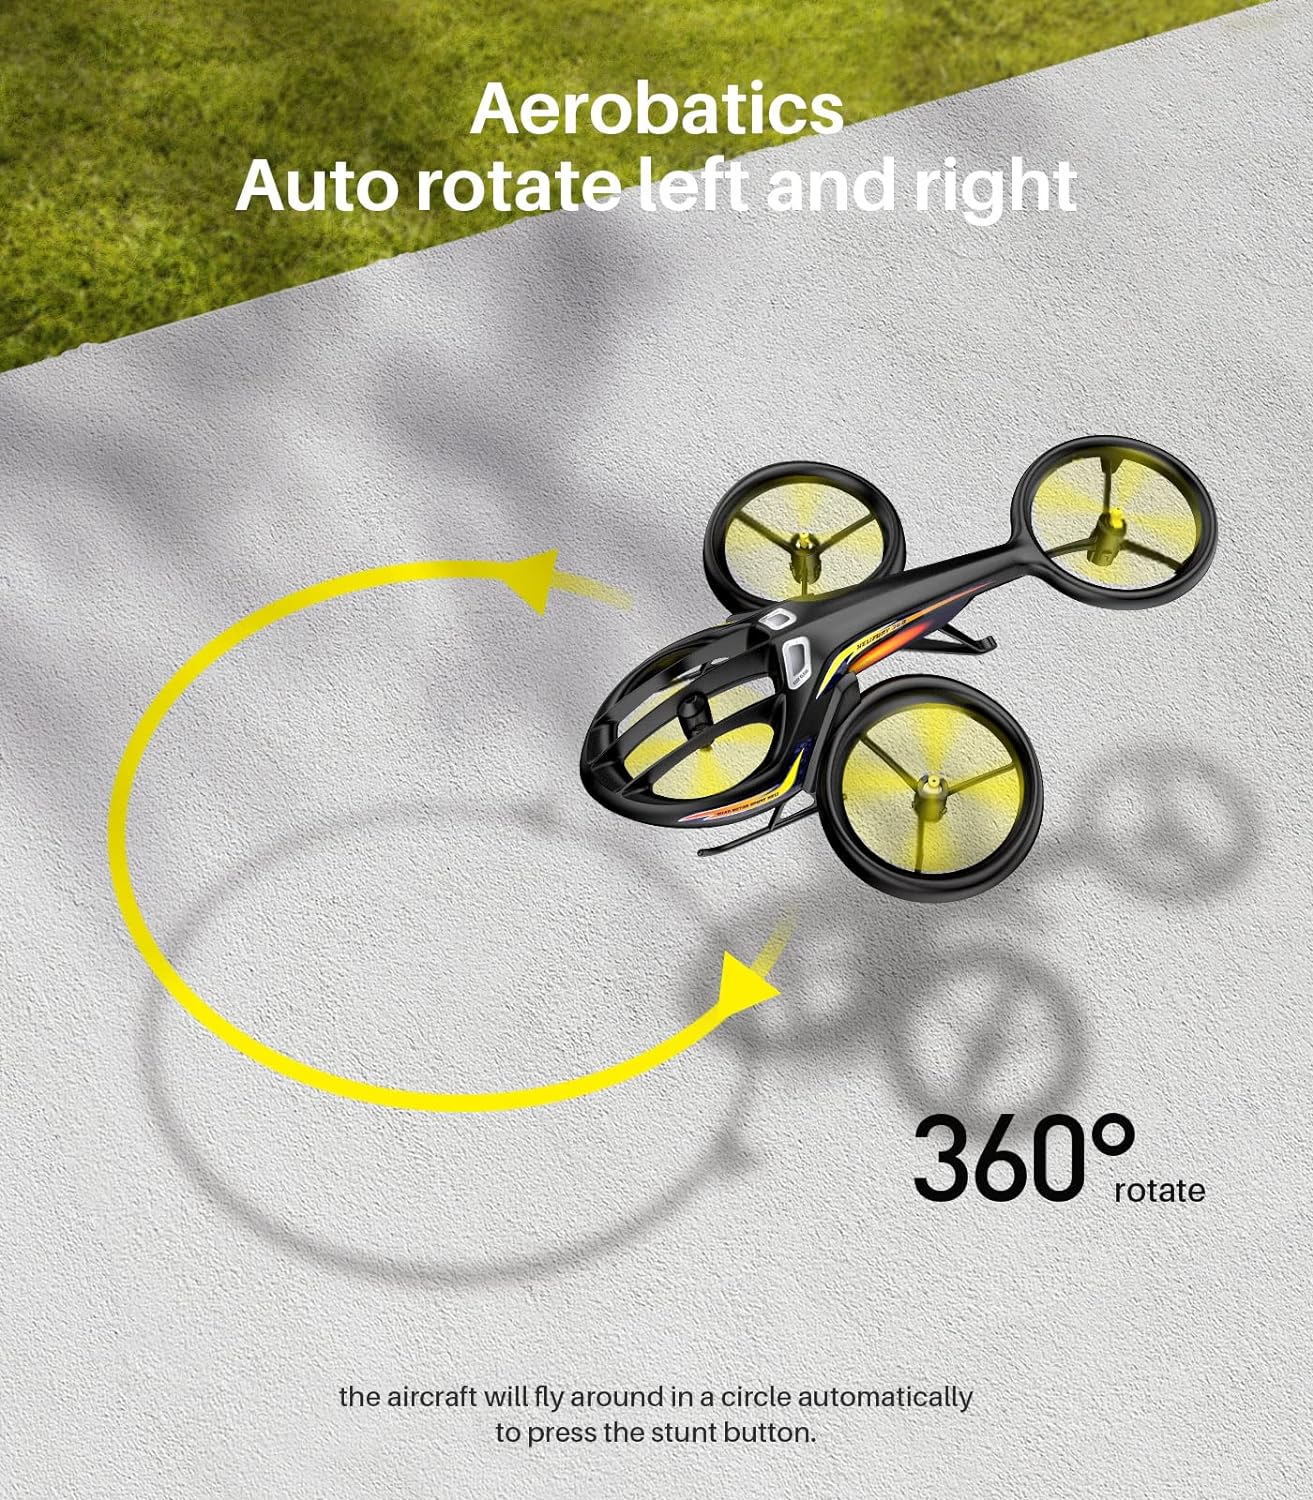 SYMA RC Helicopter: The Latest Remote Control Drone Toy that's Taking the World by Storm!